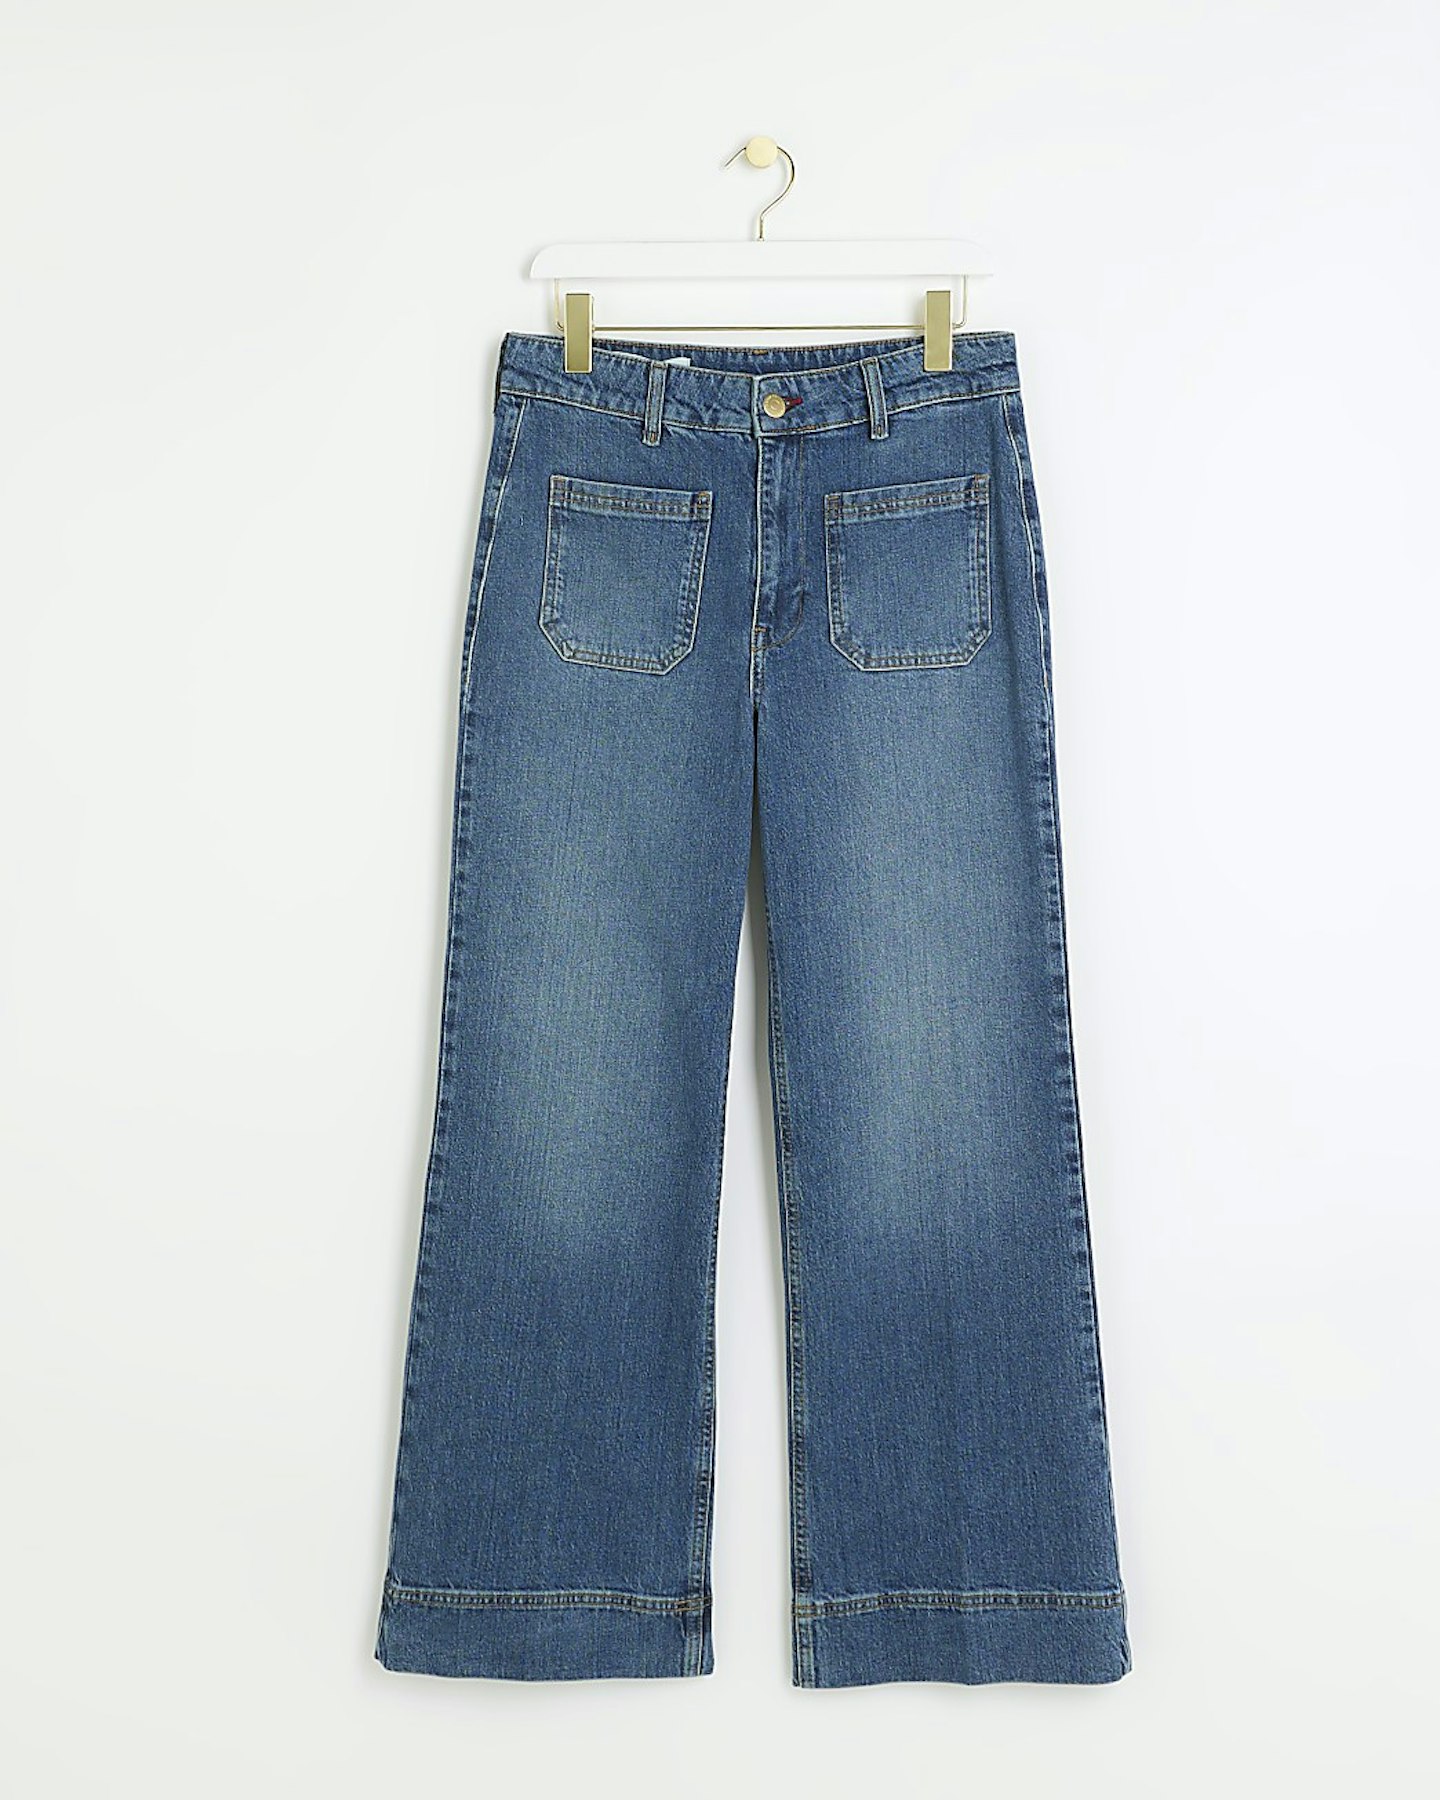 River Island, Petite Blue High Waisted Wide Flared Jeans